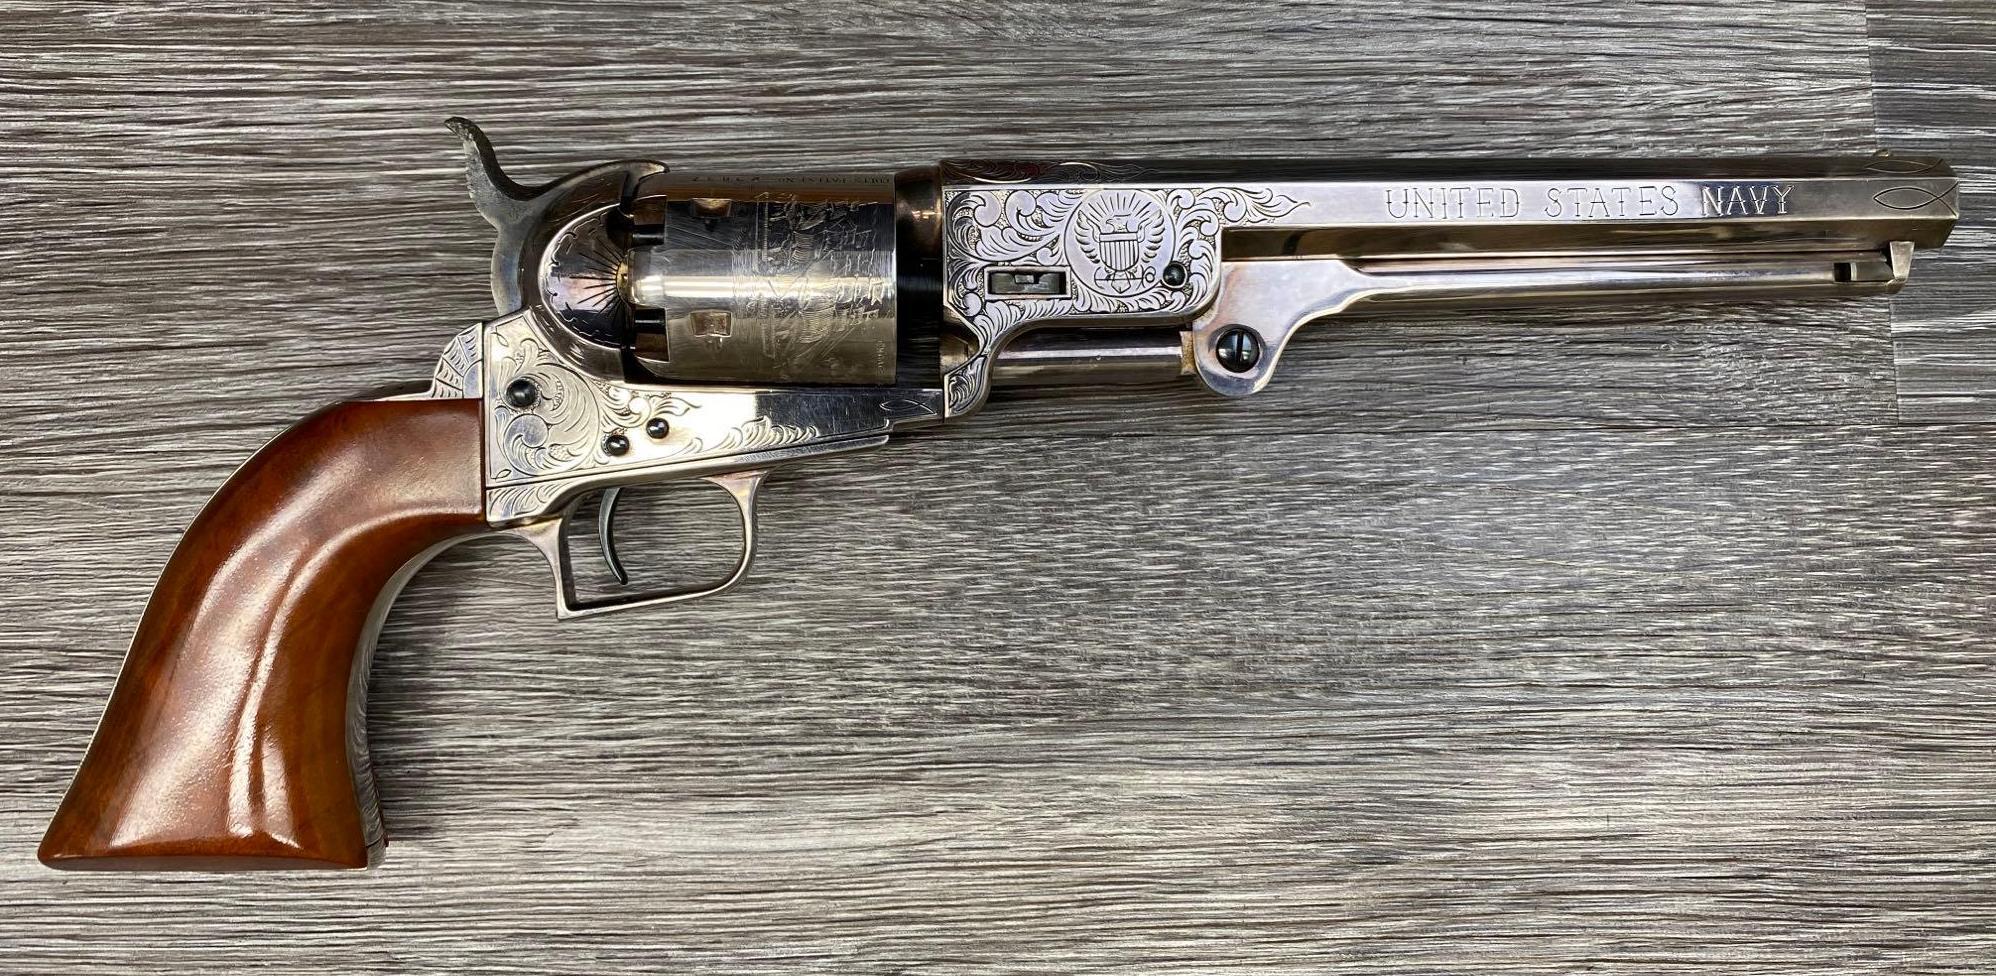 1 OF 100 CASED, ENGAVED, SILVER-PLATED U.S. NAVY COMMEMORATIVE COLT M-1851 .36 CAL. REVOLVER